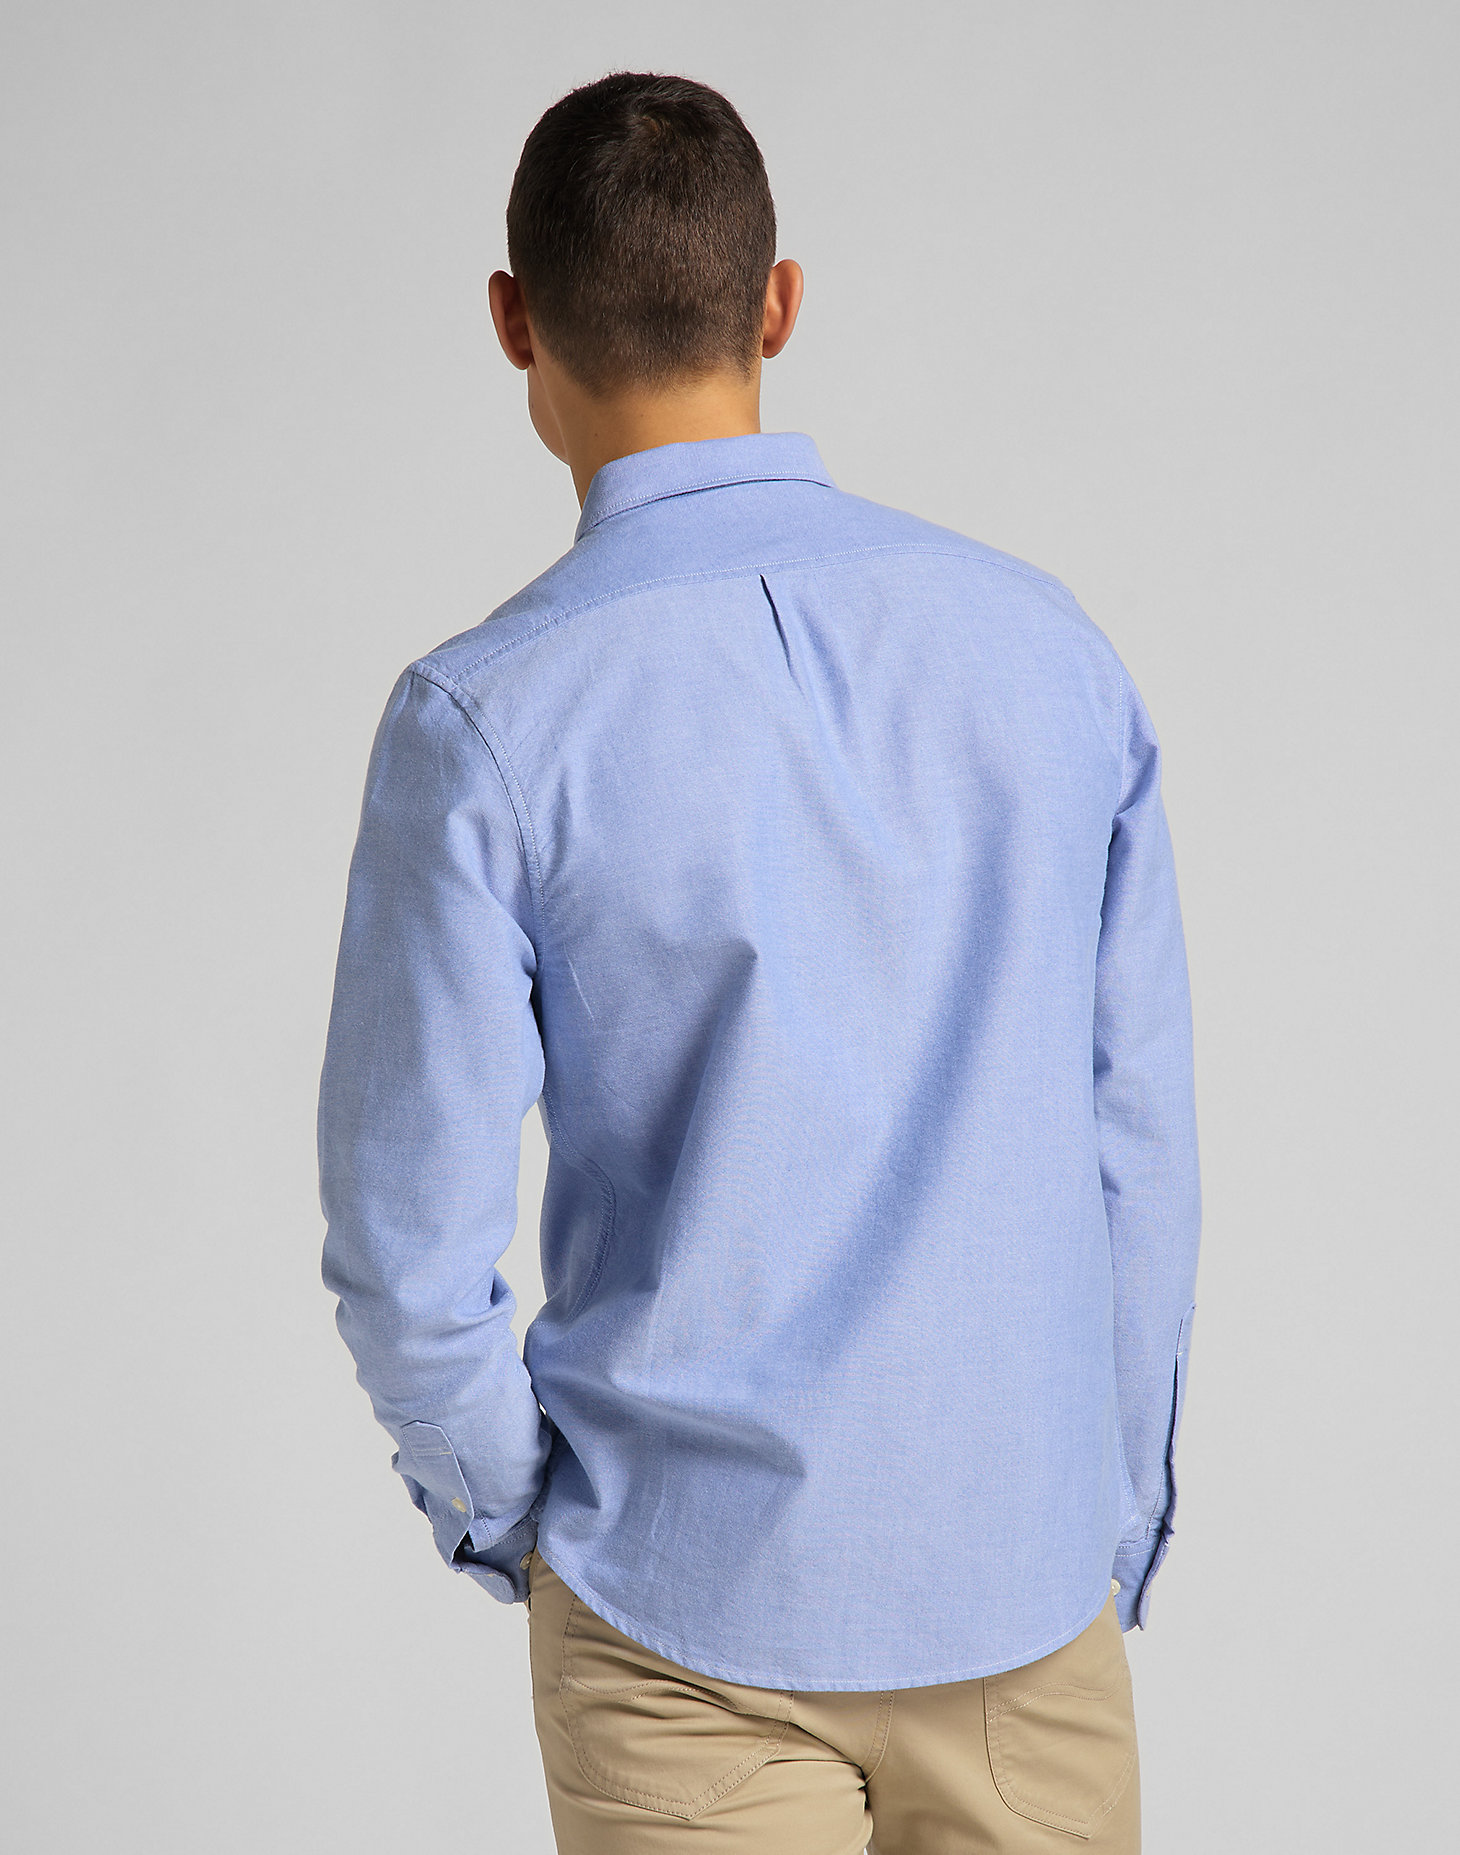 Button Down Shirt in Washed Blue alternative view 1